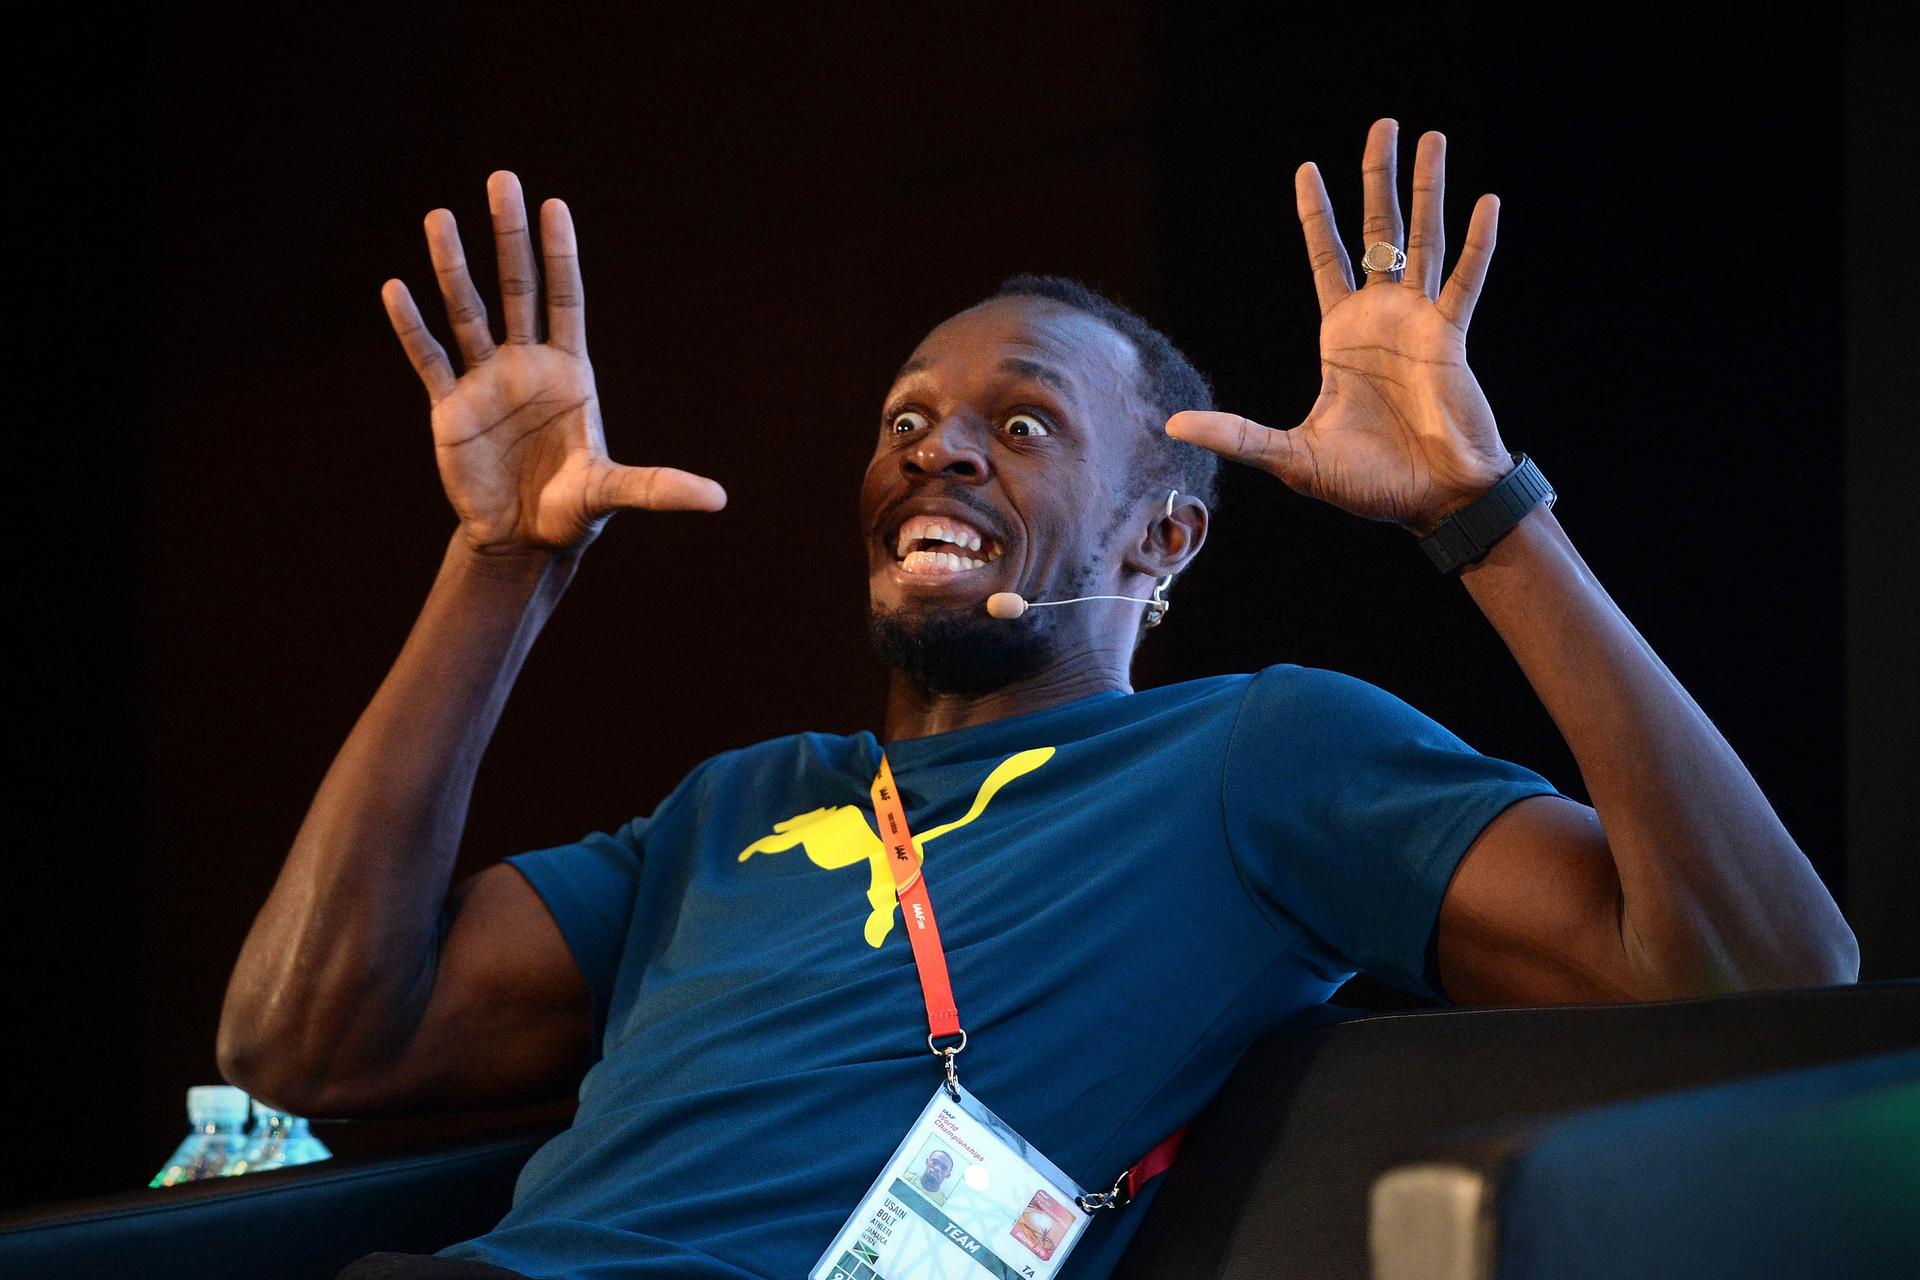 Jamaican sprint superstar Usain Bolts strikes a funny pose at a press conference ahead of the World Championships in Beijing. Photos: AFP